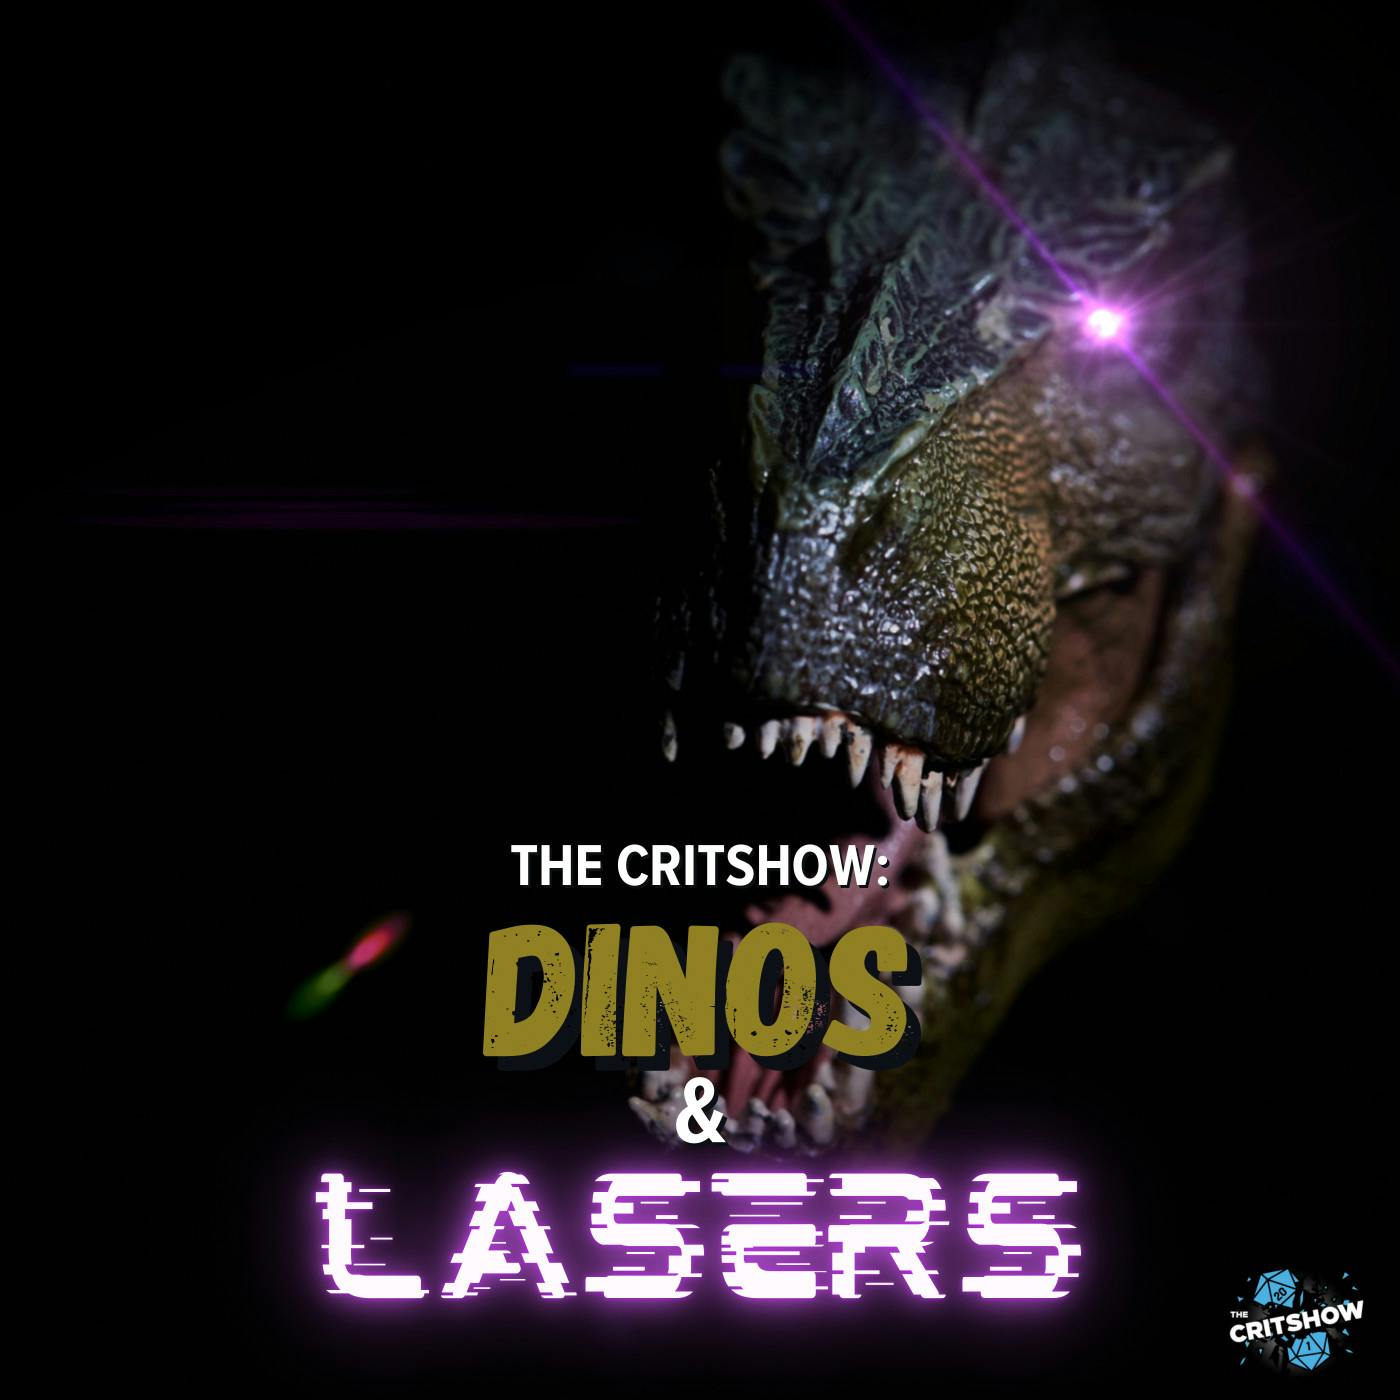 The Critshow: Dinos & Lasers